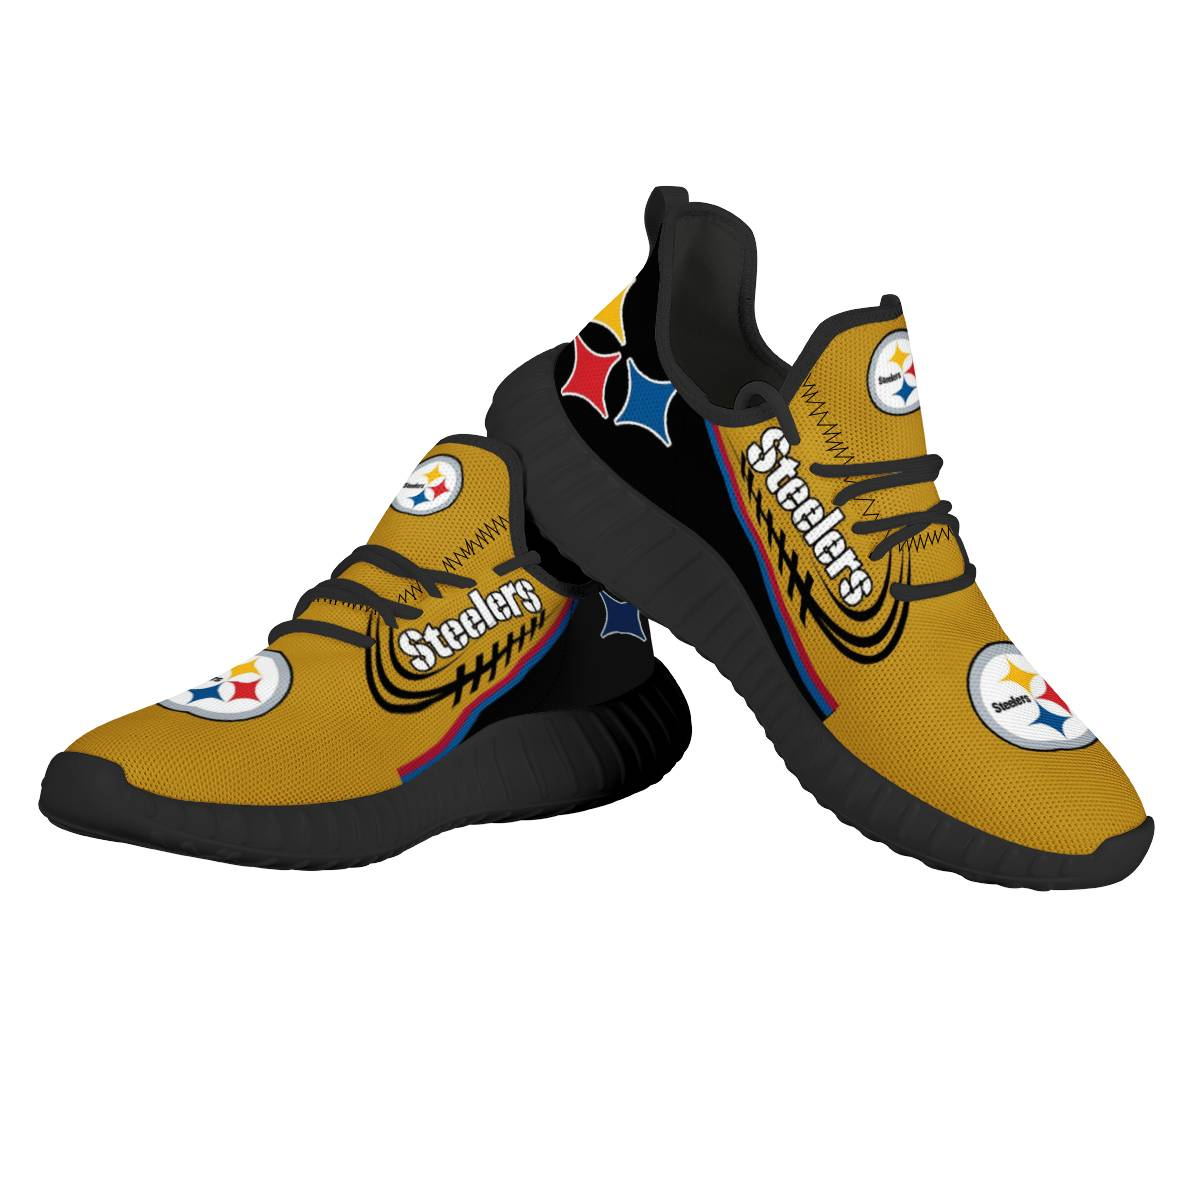 Women's Pittsburgh Steelers Mesh Knit Sneakers/Shoes 013